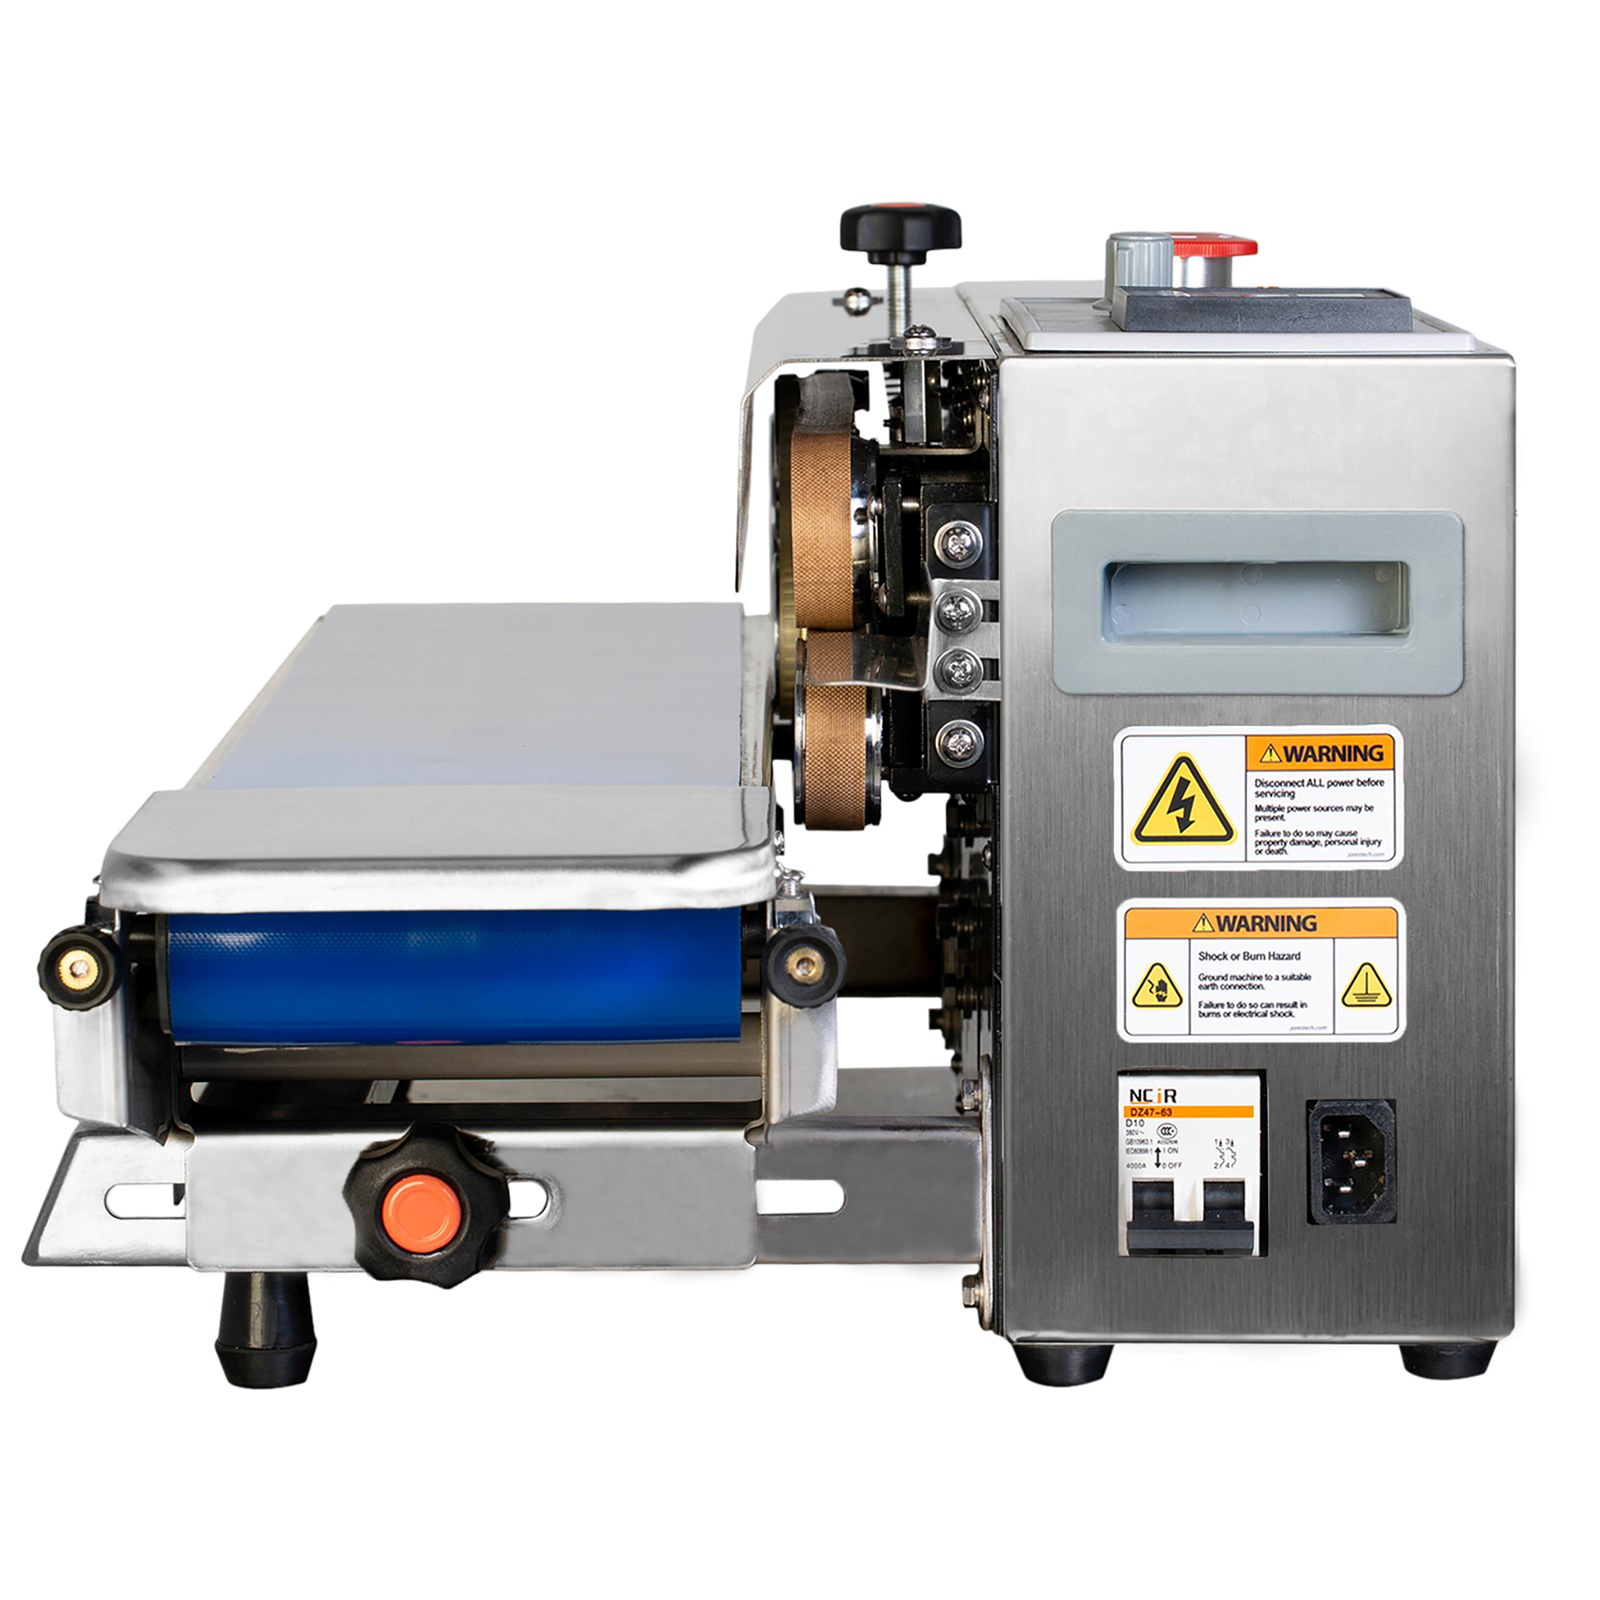 JORES TECHNOLOGIES® continuous band sealer and the heating element that seals the bags. Bag sealer is set for horizontal applications. 